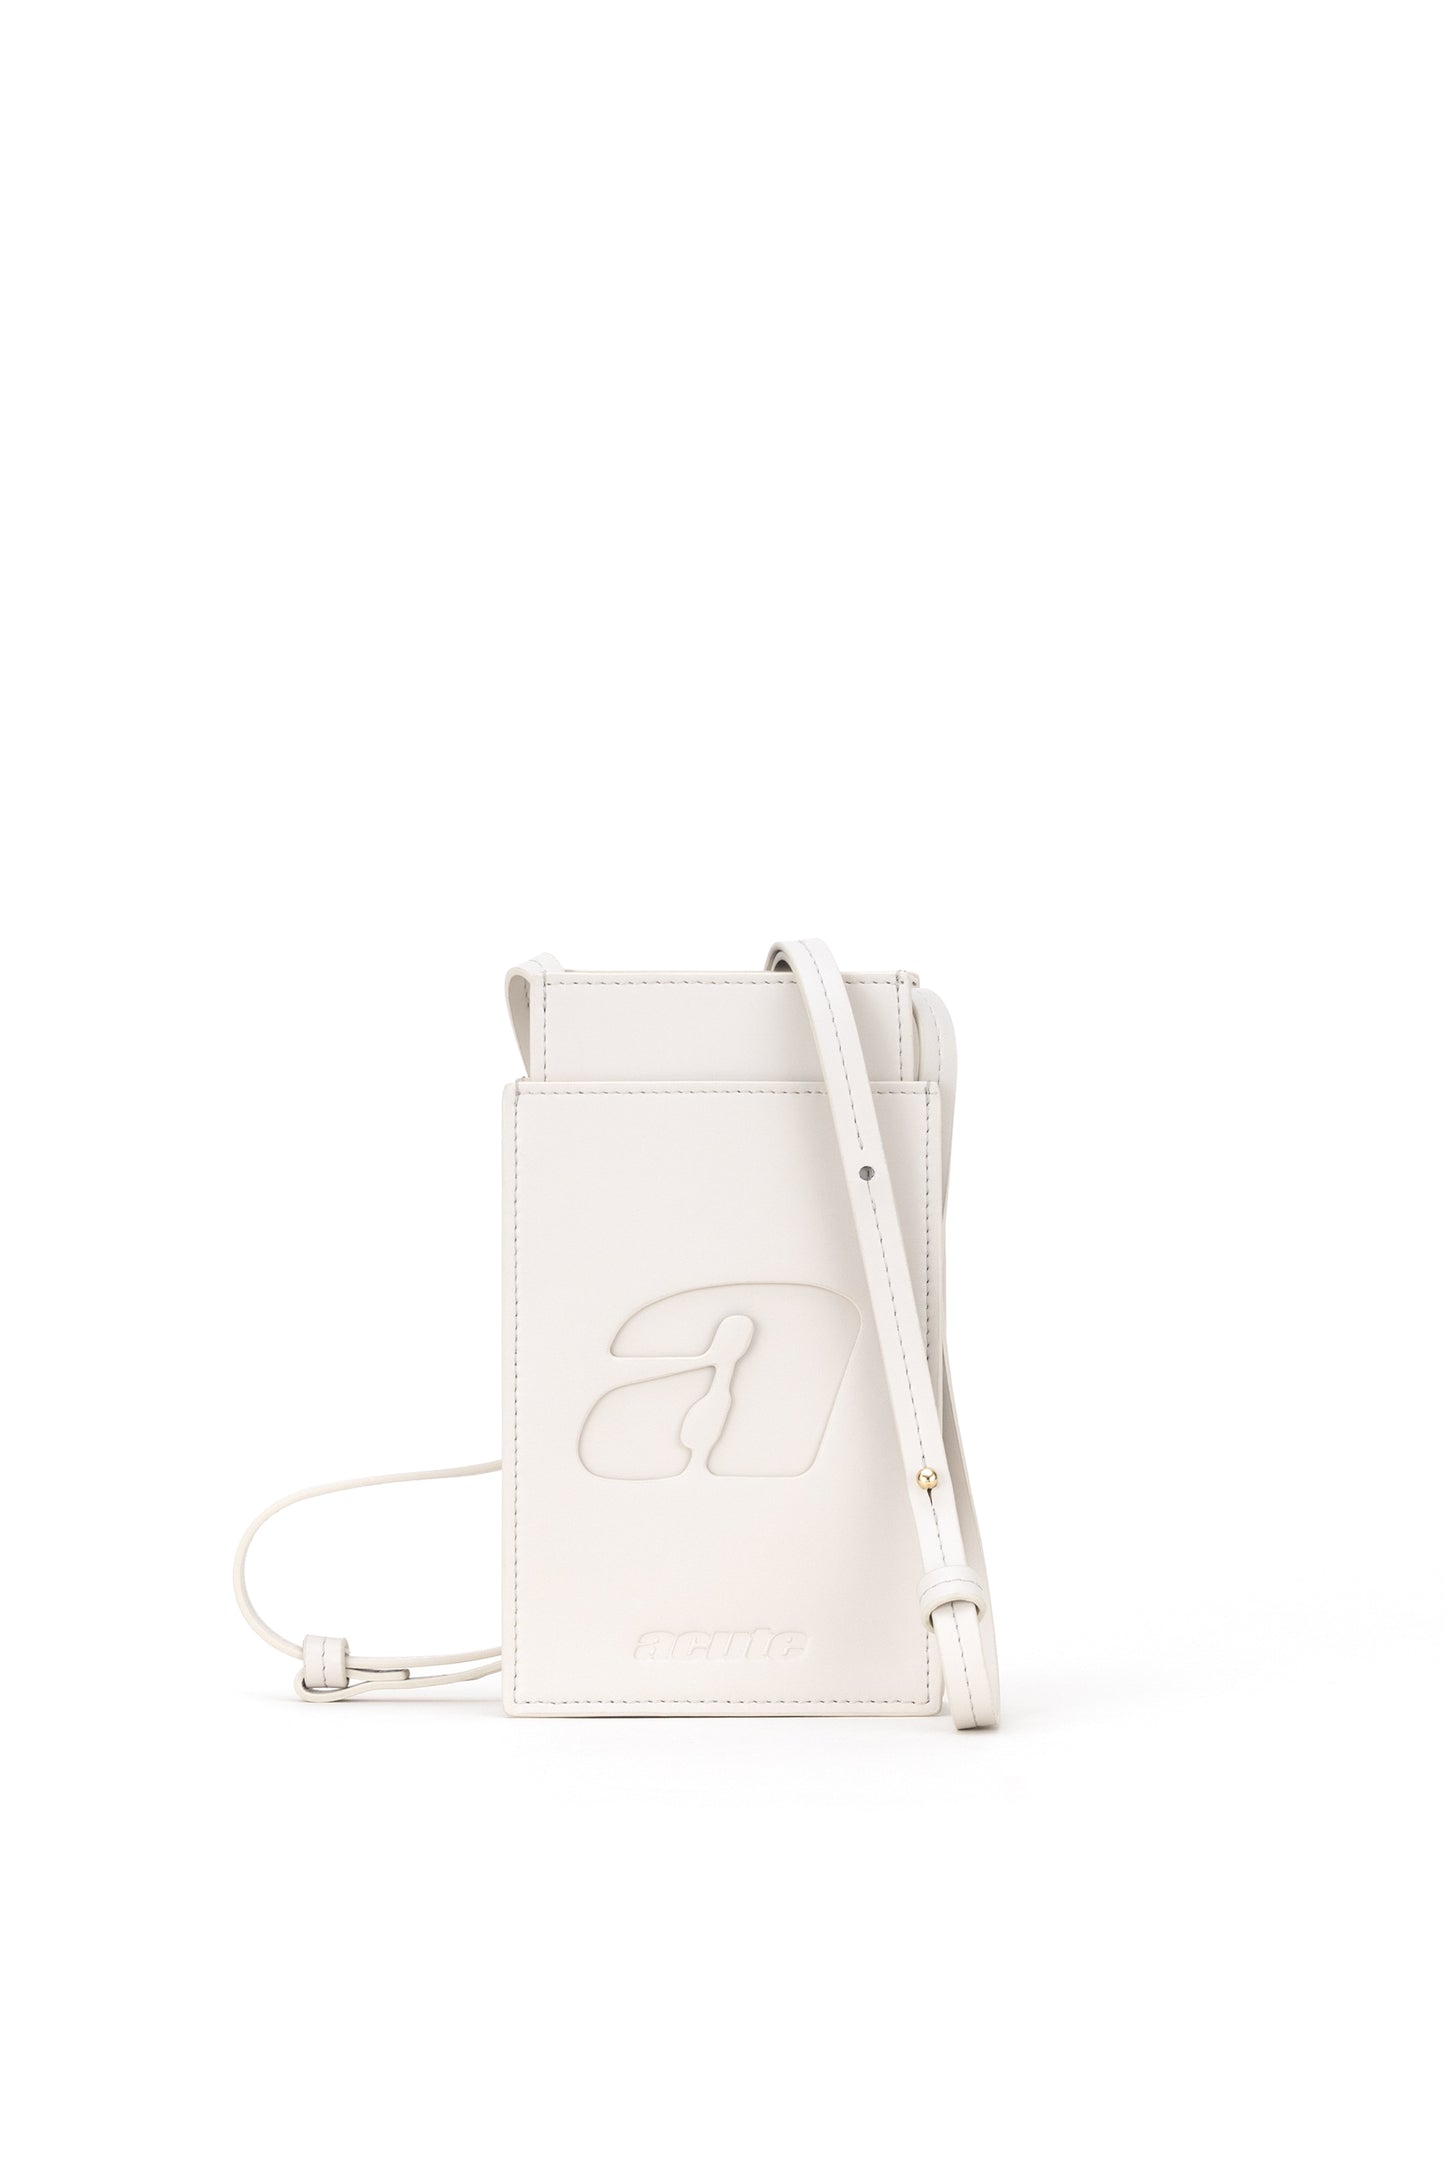 Crossbody Phone Pouch in Ivory